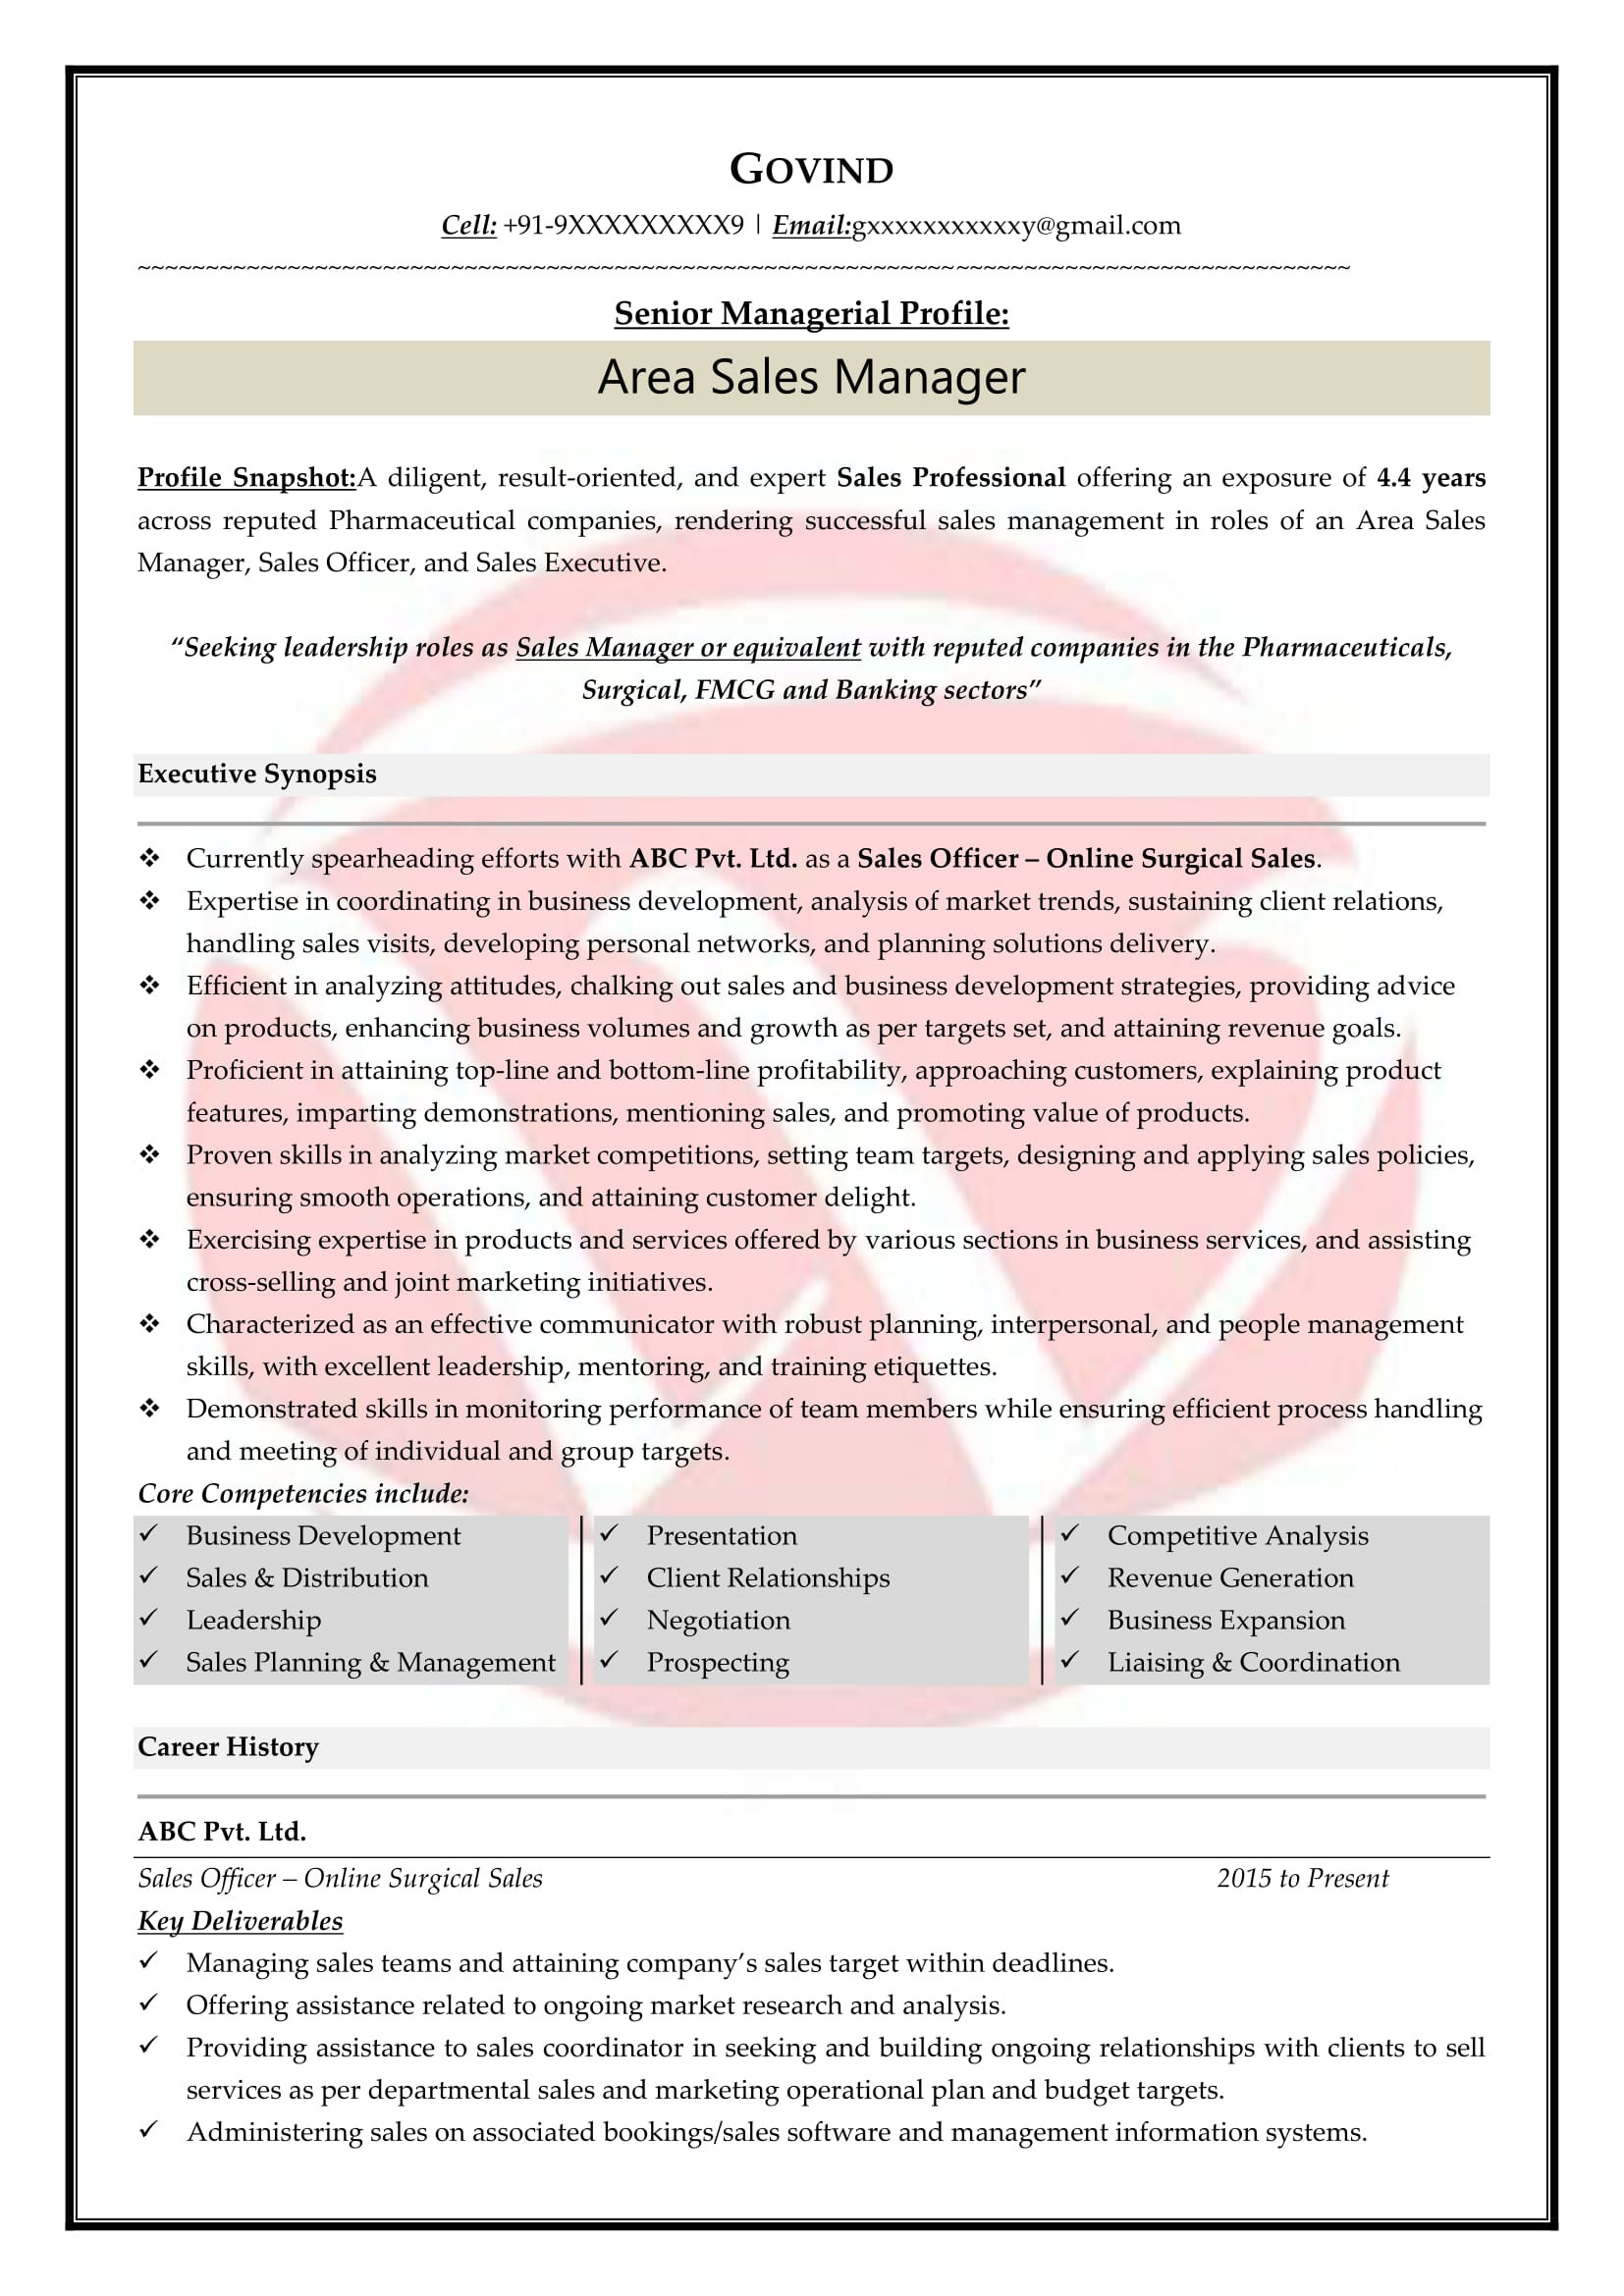 Sample Resume format for Sales Executive Sales Sample Resumes, Download Resume format Templates!